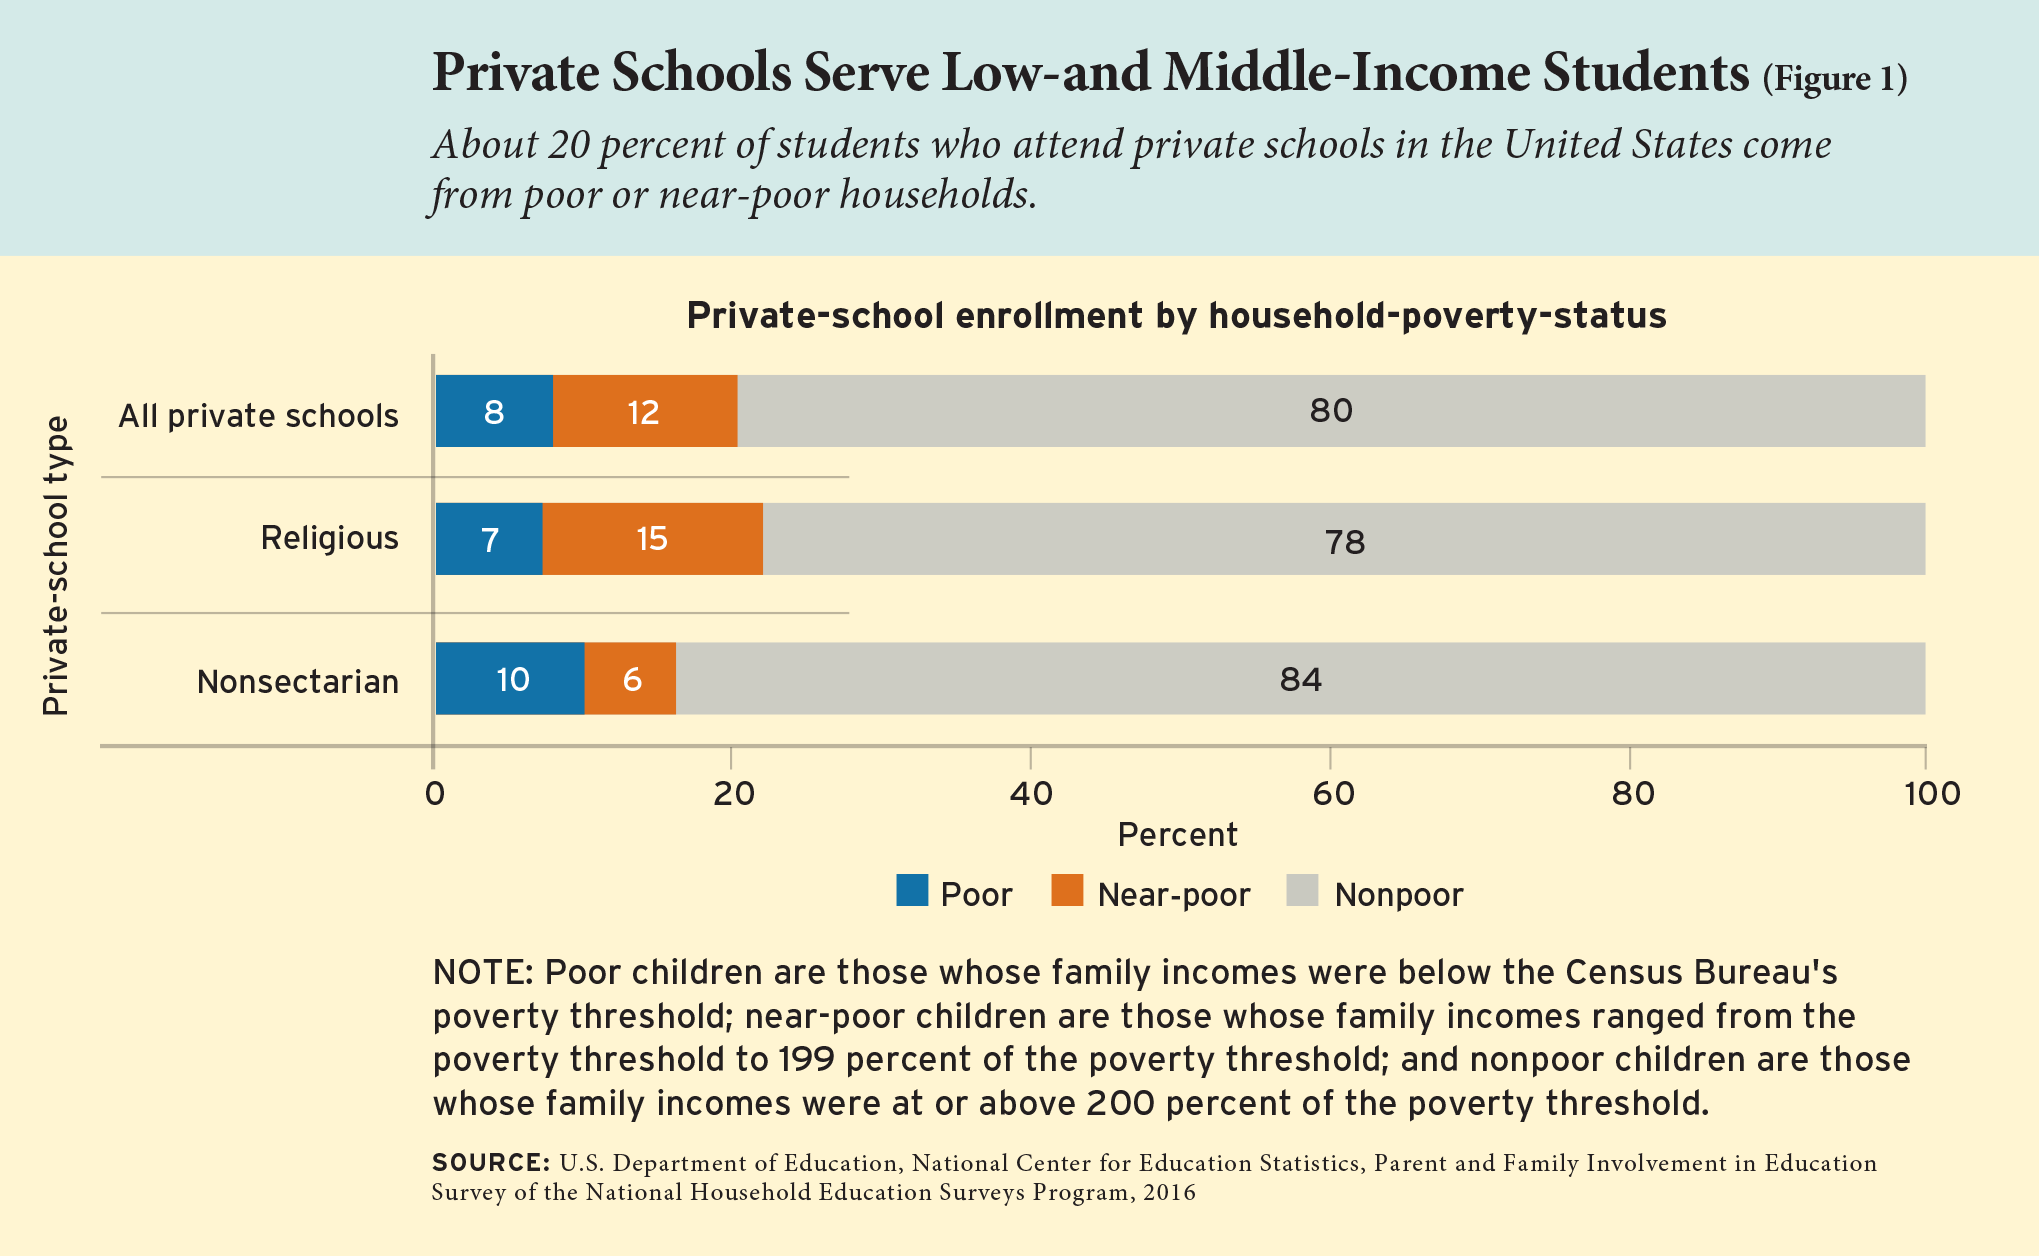 Figure 1: Private Schools Serve Low-and Middle-Income Students